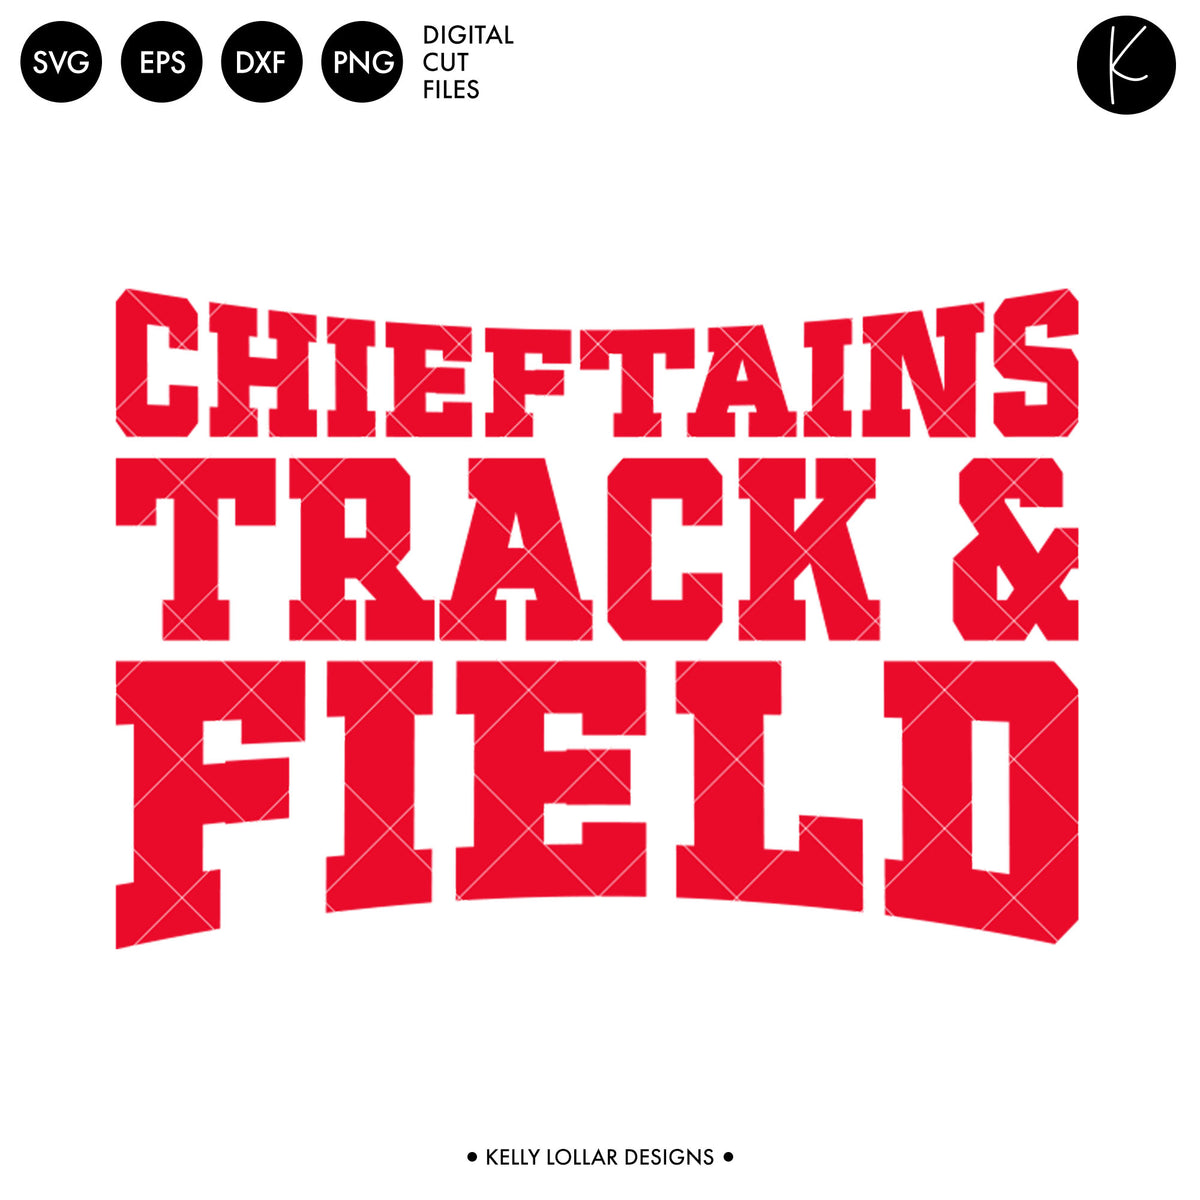 Chieftains Track &amp; Field Bundle | SVG DXF EPS PNG Cut Files